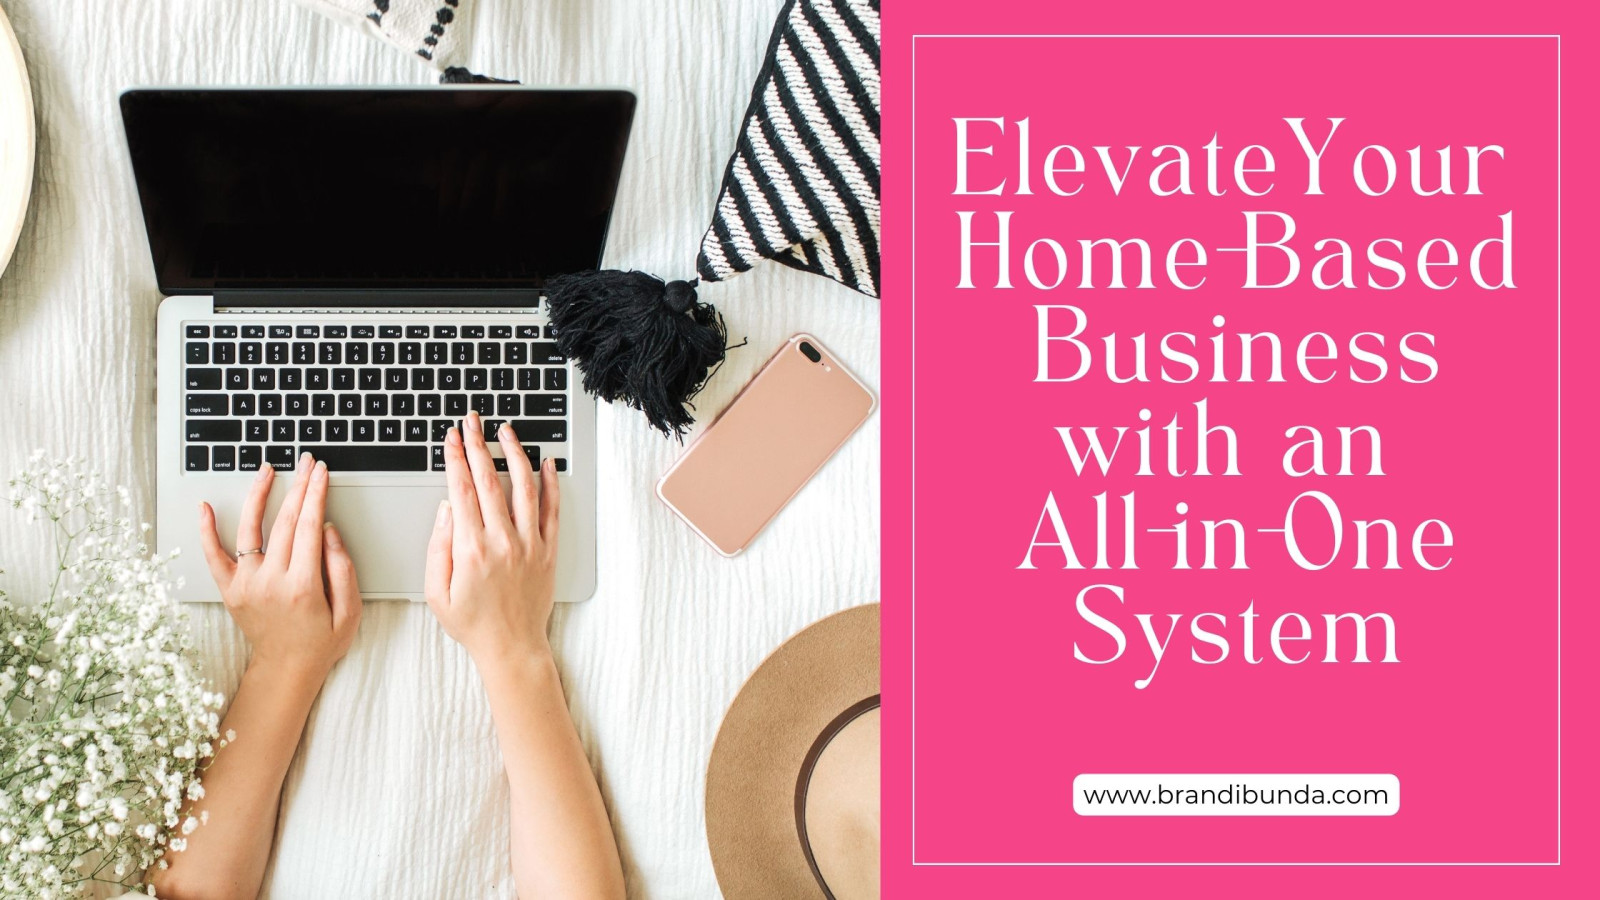 Elevate Your Home-Based Business With an All-in-One System